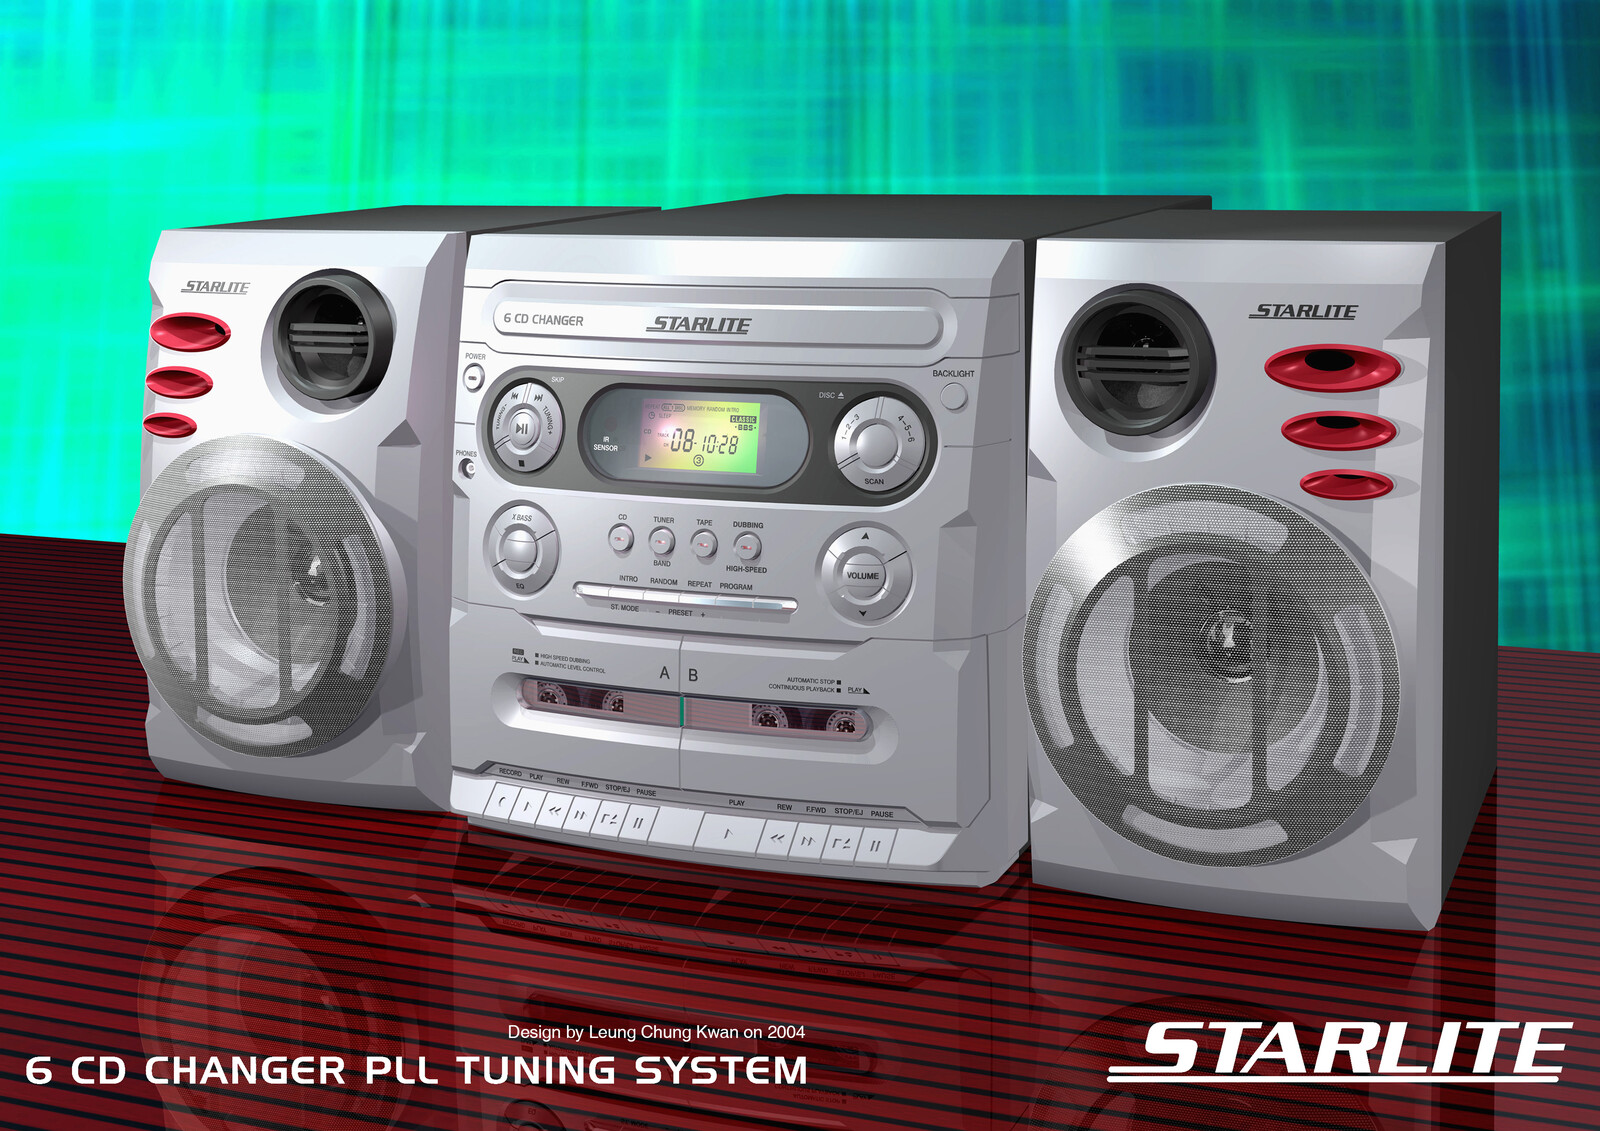 💎 6 CD Changer PLL Tuner with Double Cassette Hi-Fi | Design by Leung Chung Kwan on 2004 💎
Brand Name︰Starlite | Client︰Star Light Electronics Co., LTD.
Other Views︰http://bit.ly/sl02f-6cd-pll-double